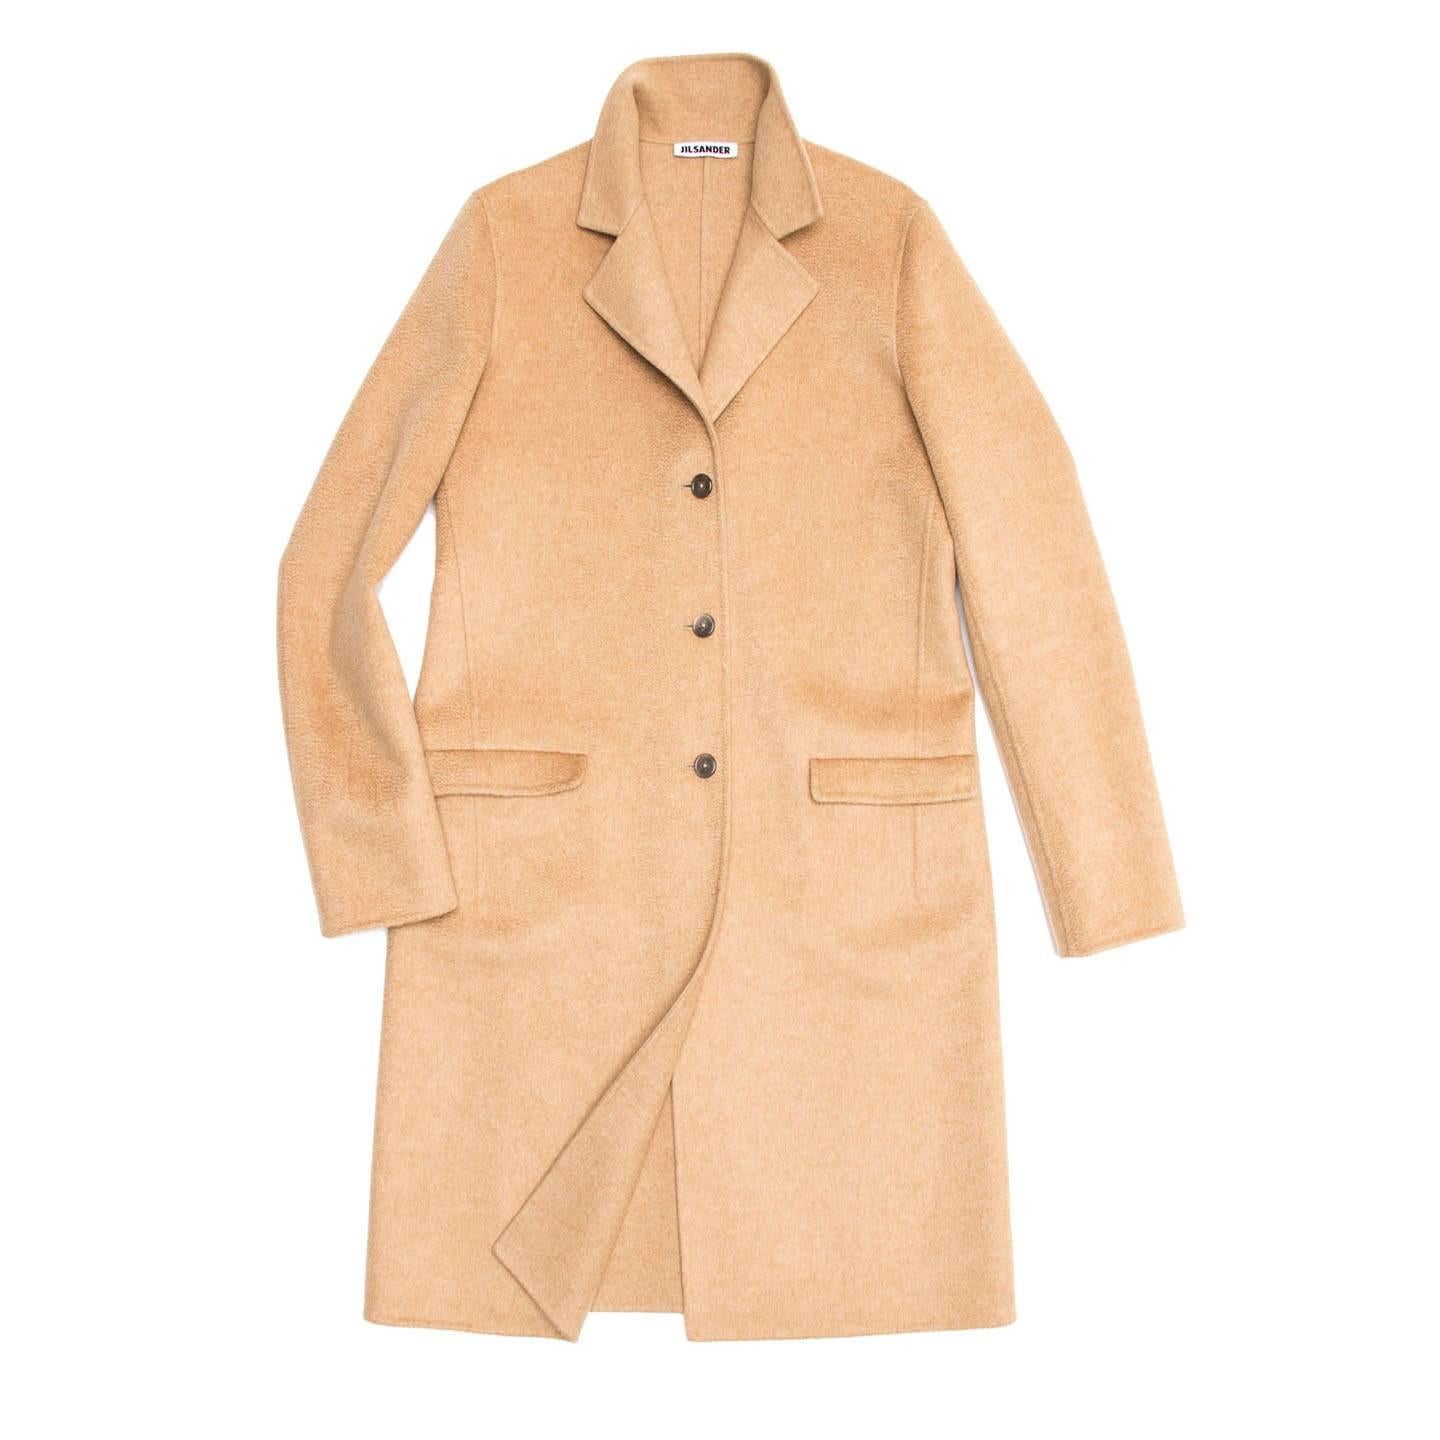 Long camel coat in luxurious cashmere. 3 buttoned closure with 2 flap pockets at front side. Long back vent for ease of movement.

Size  38 French sizing

Condition  Excellent: worn once